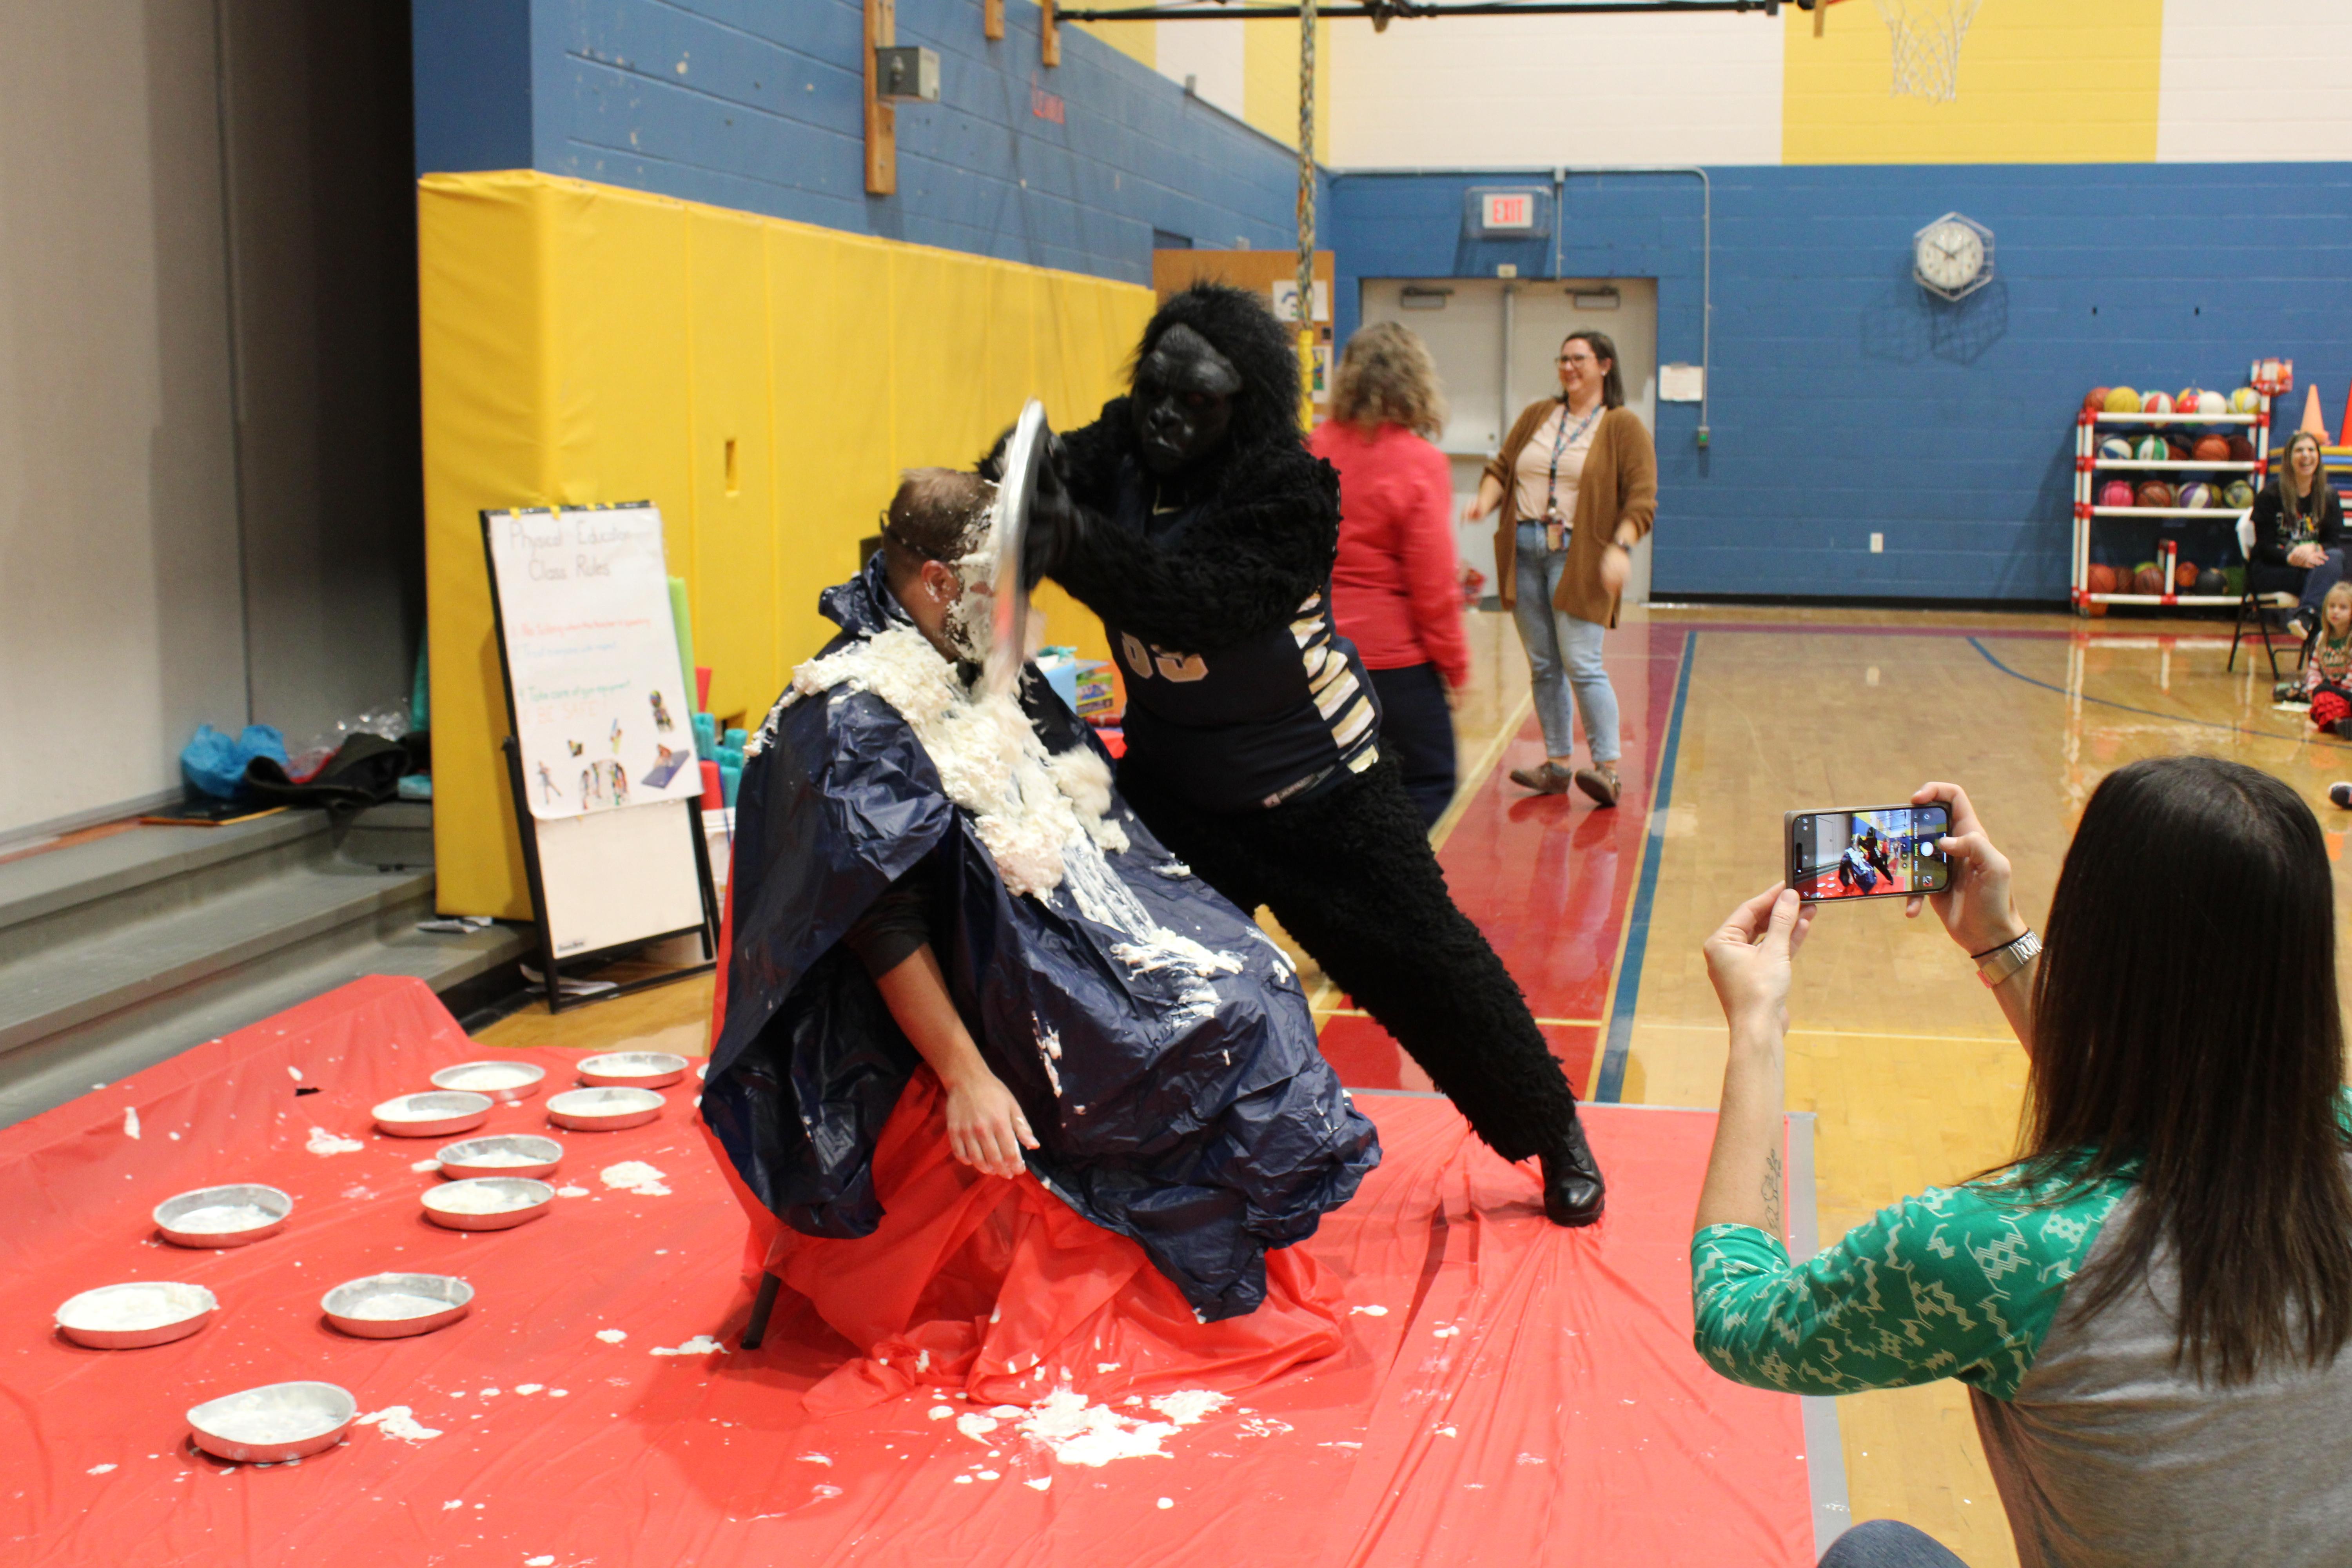 pic of a gorilla putting a pie in the face of a seated man